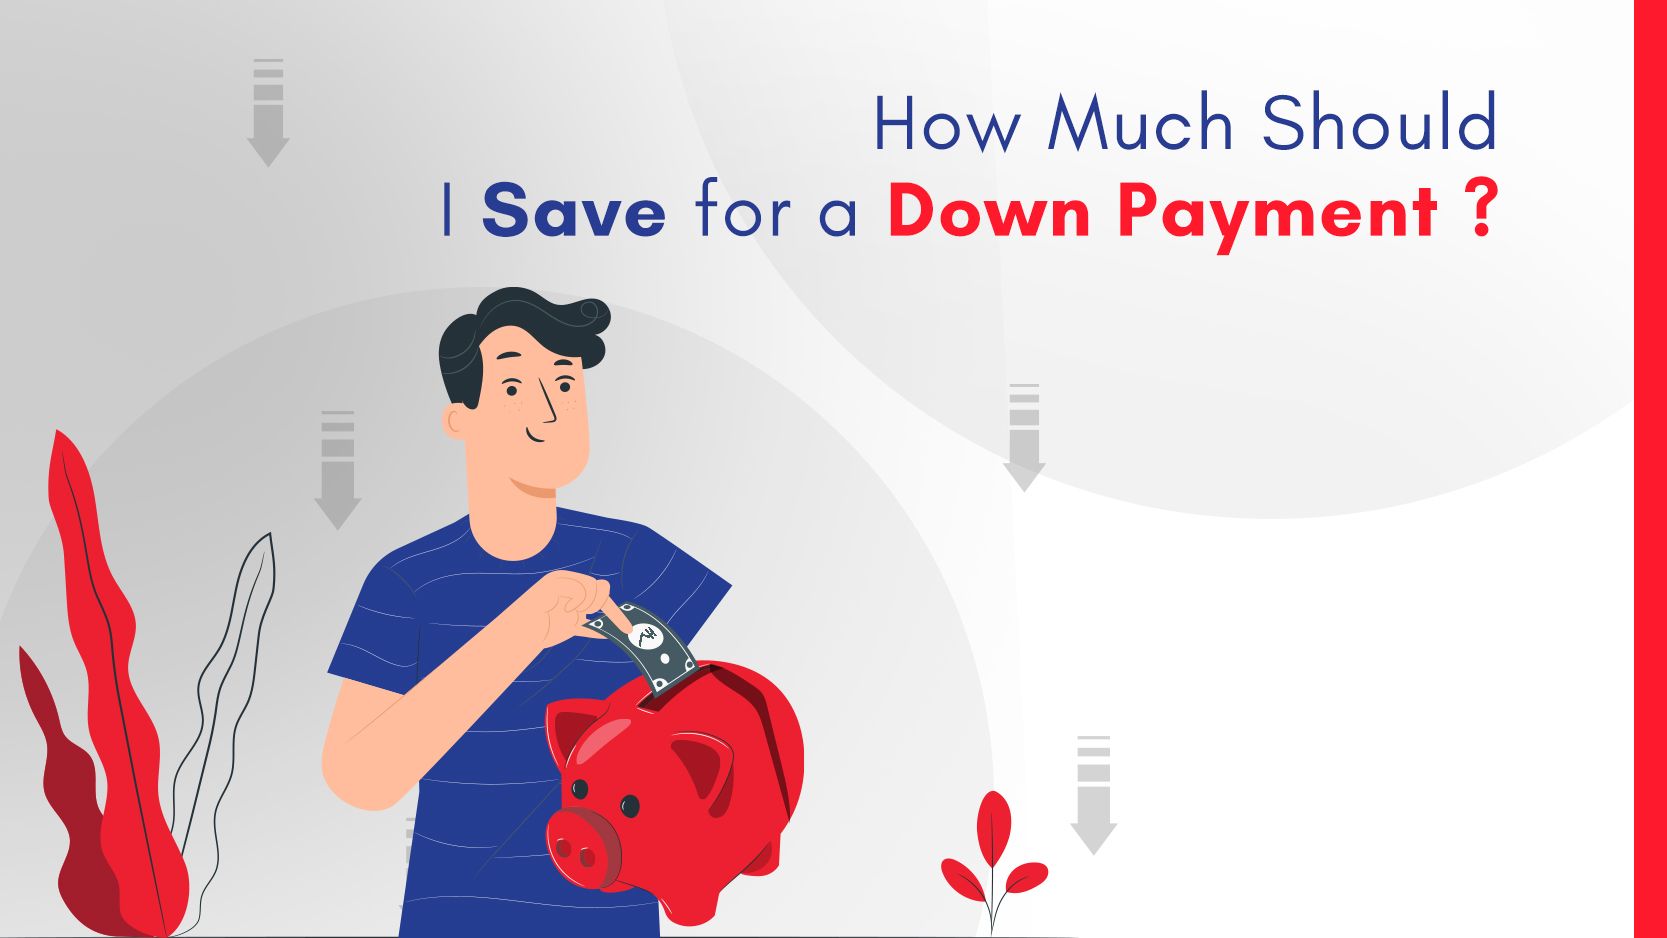 How much should I save for a down payment?